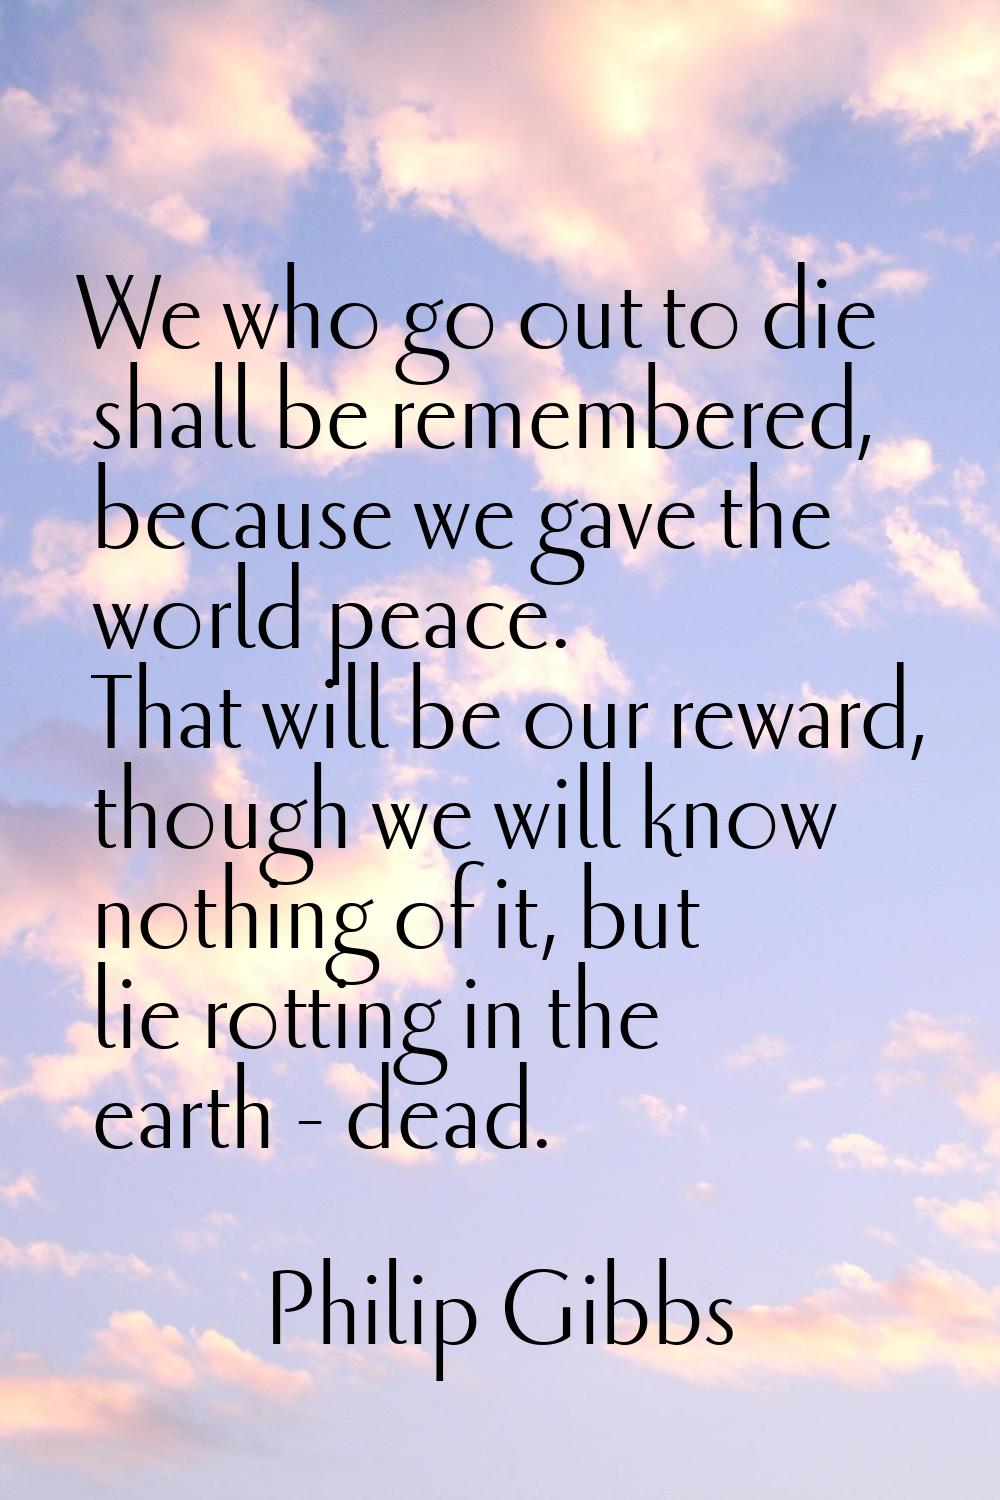 We who go out to die shall be remembered, because we gave the world peace. That will be our reward,